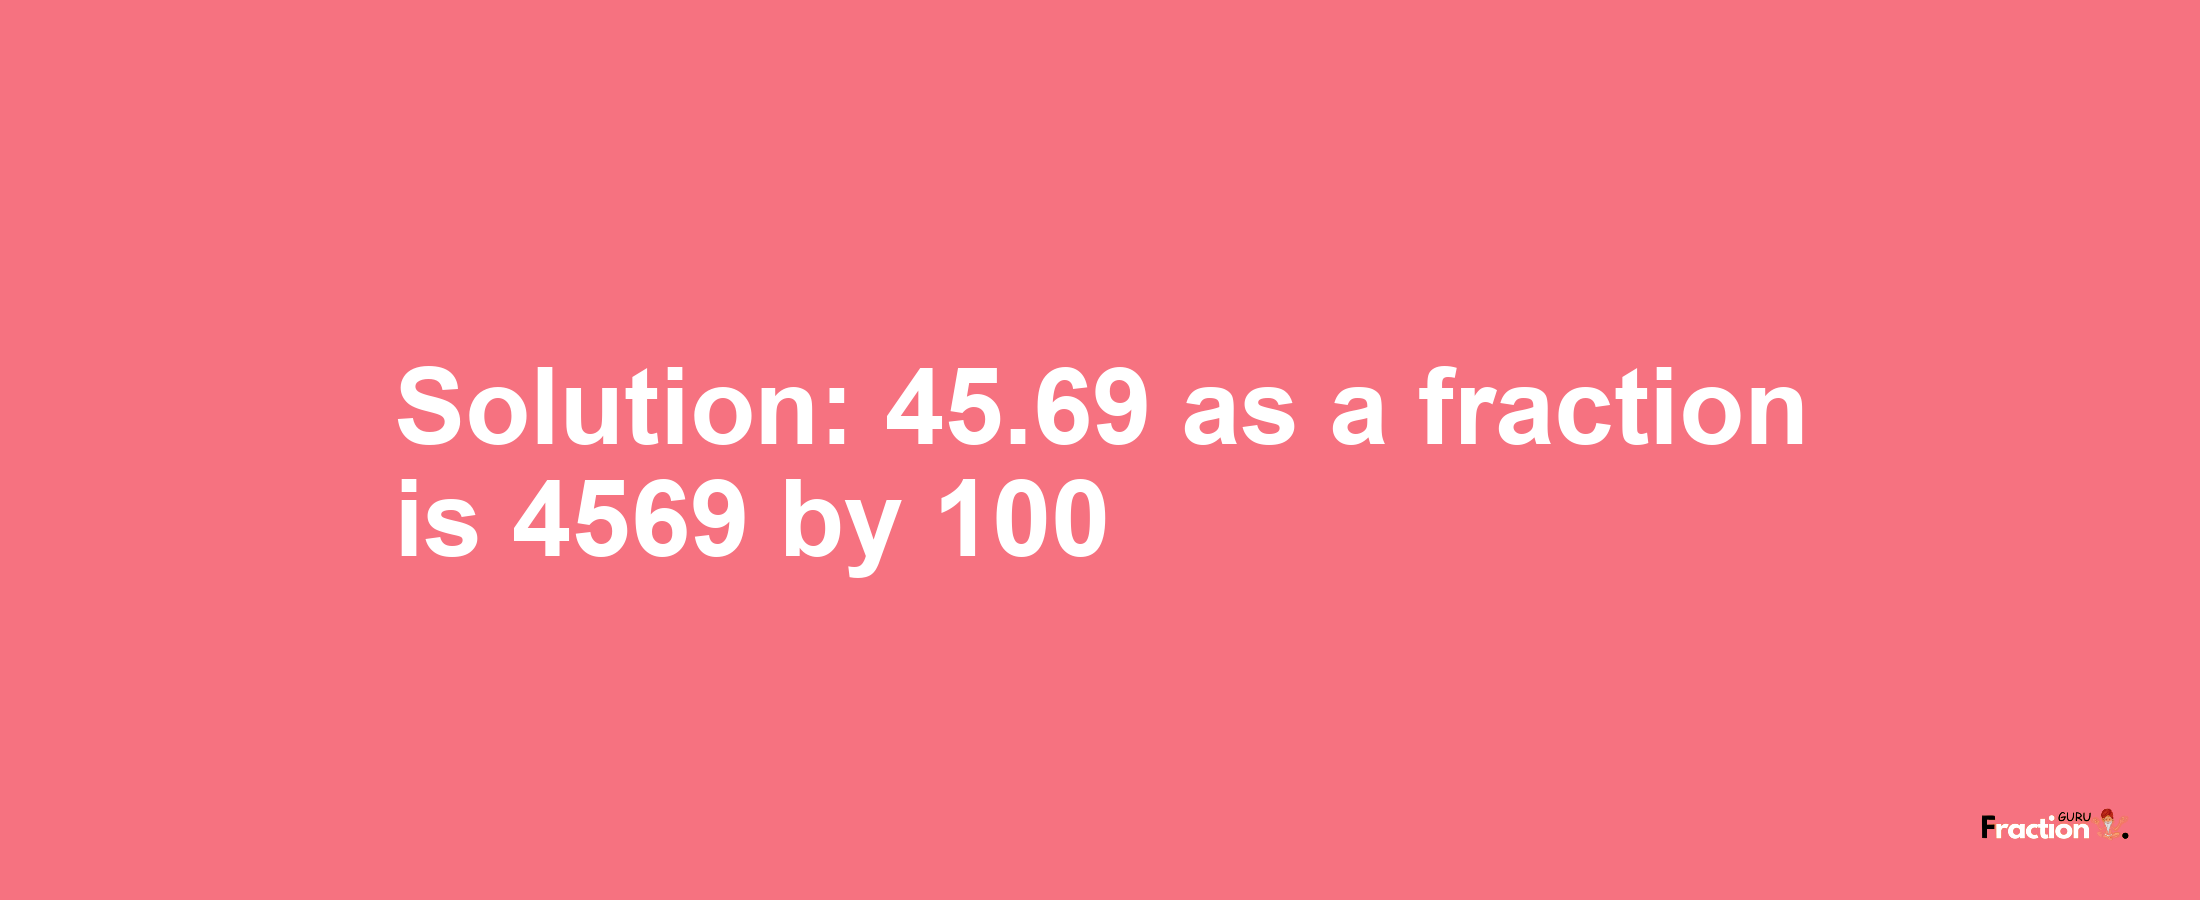 Solution:45.69 as a fraction is 4569/100